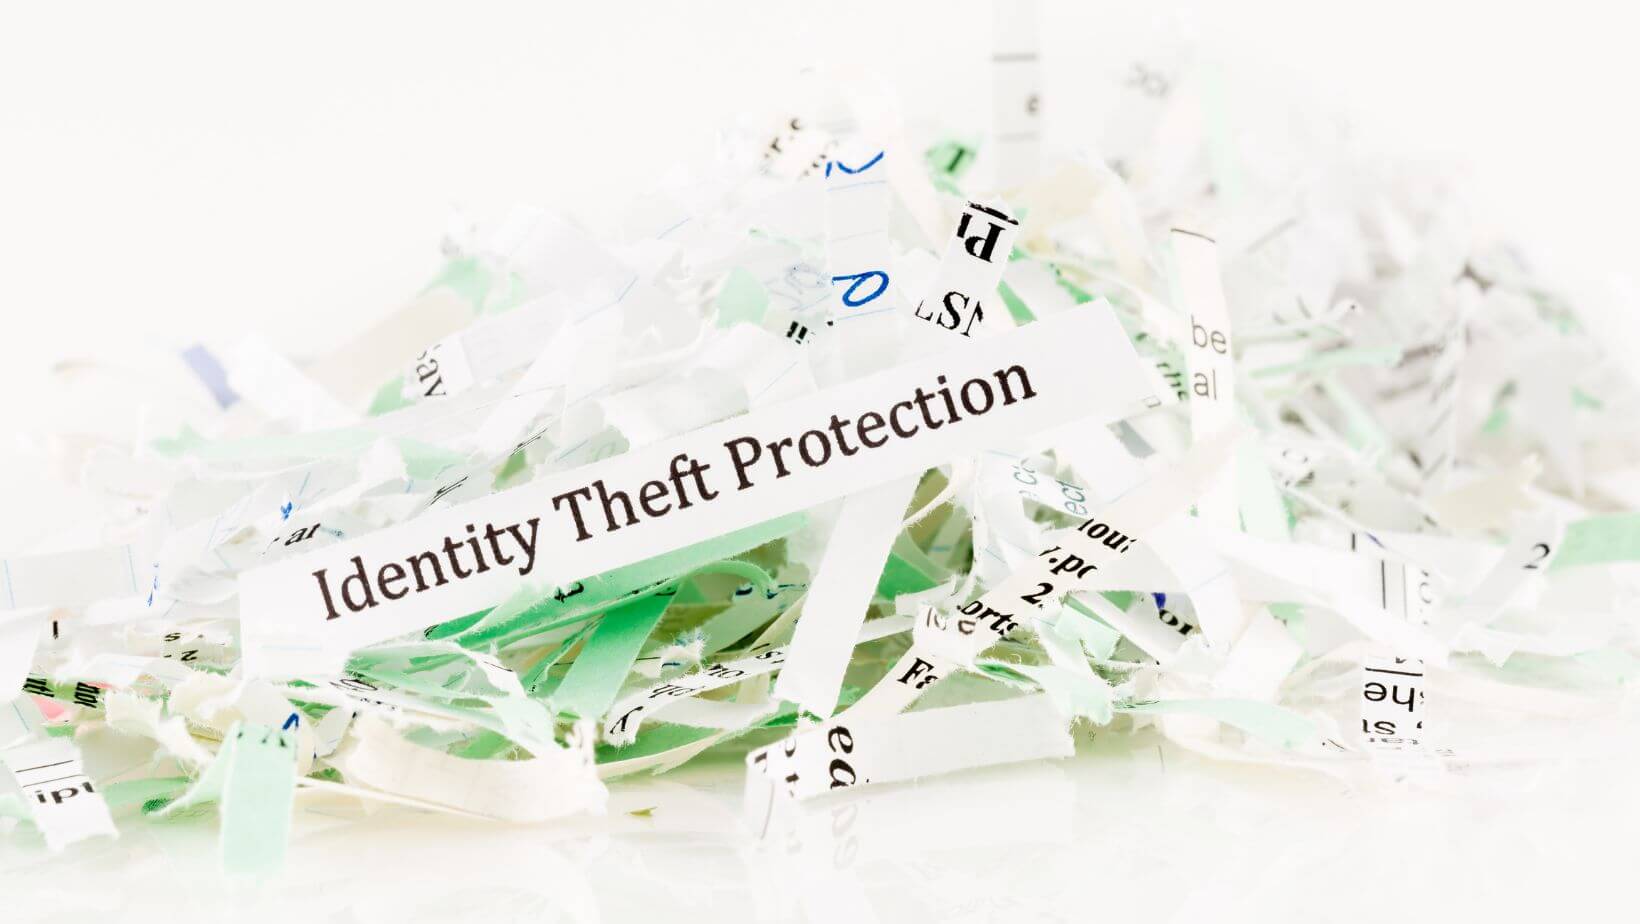 shredding protecting from identity theft and Dumpster diving